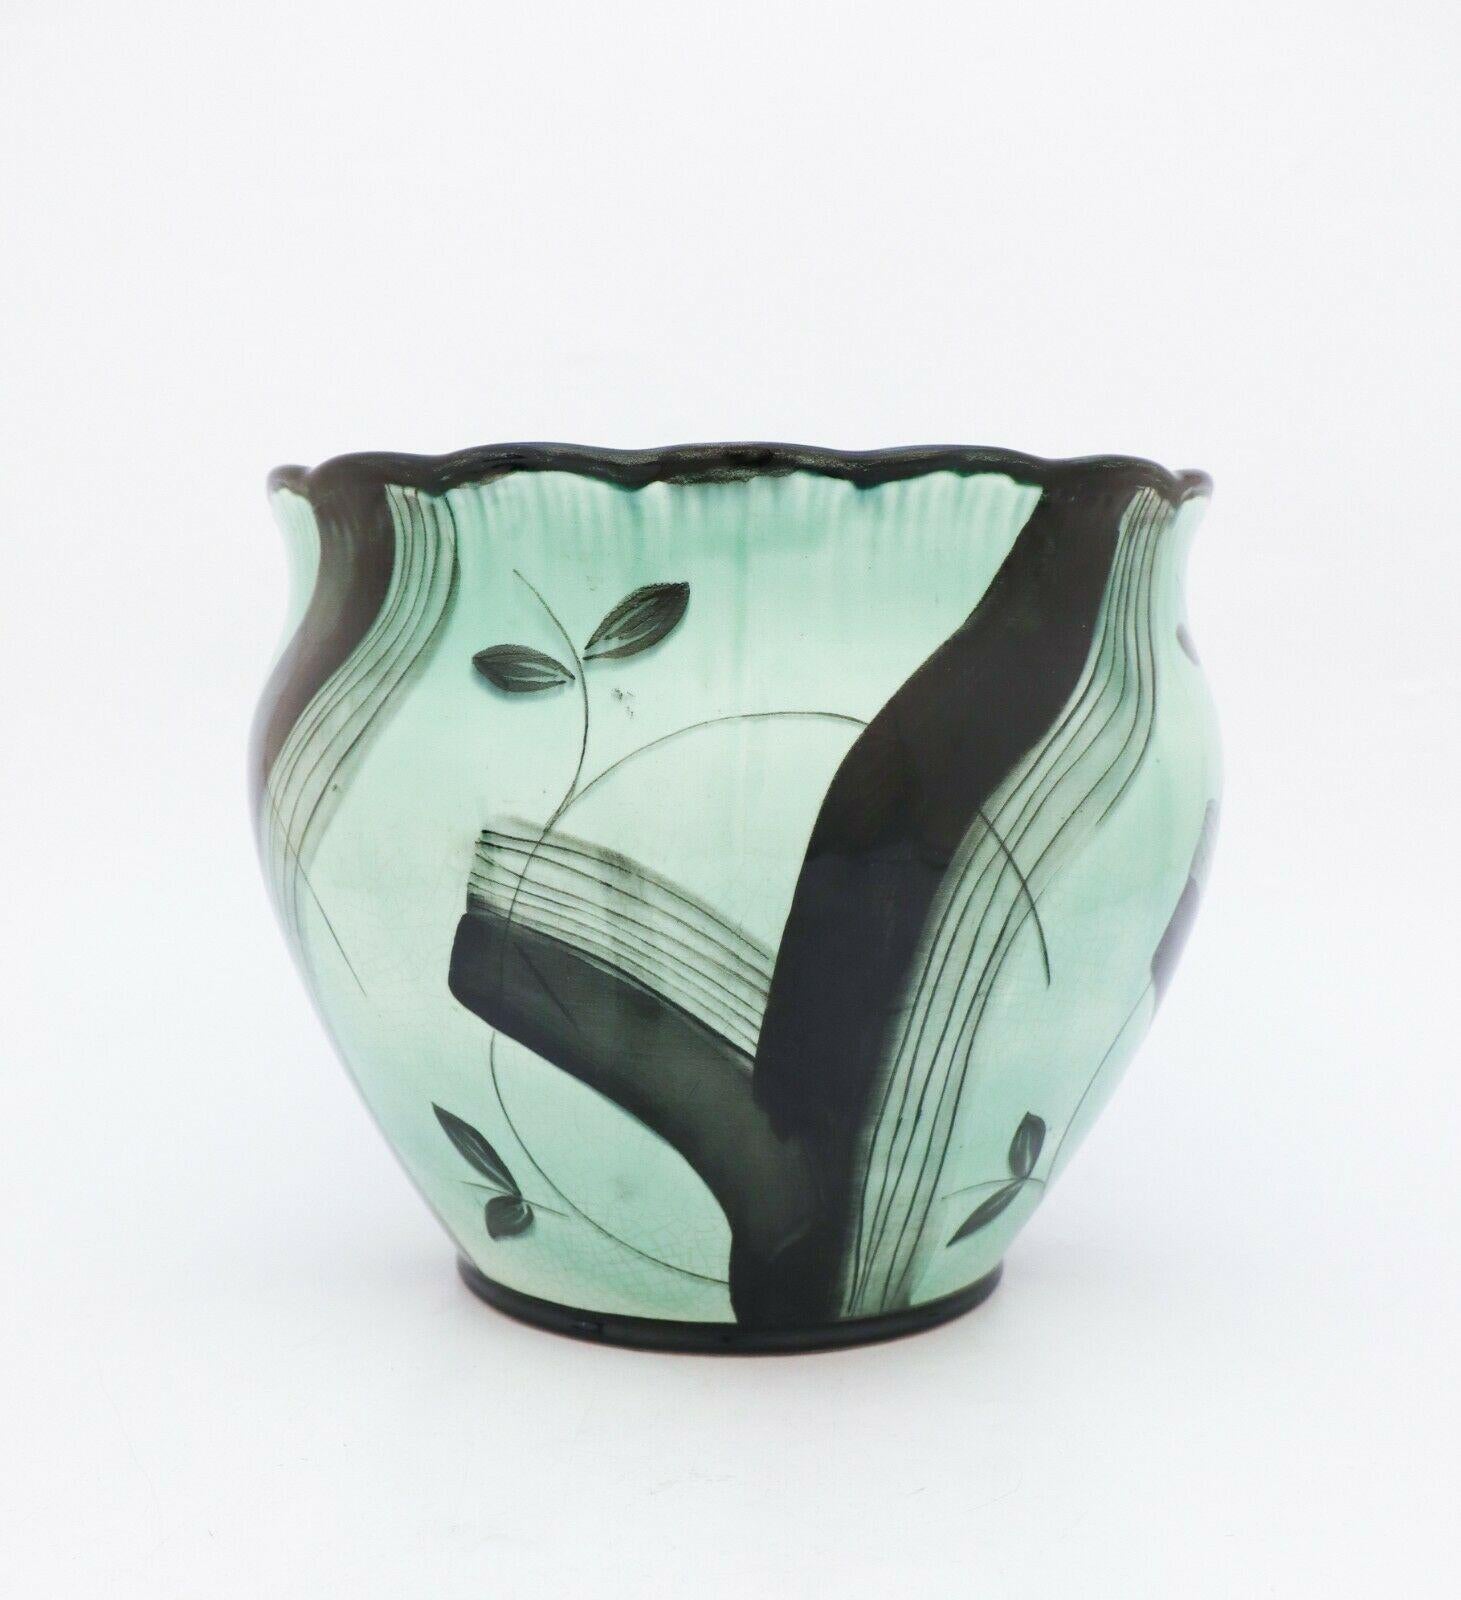 A lovely flower pot designed by Ilse Claesson in the 1930s at Rörstrand, Sweden. This is an items in her very famous 